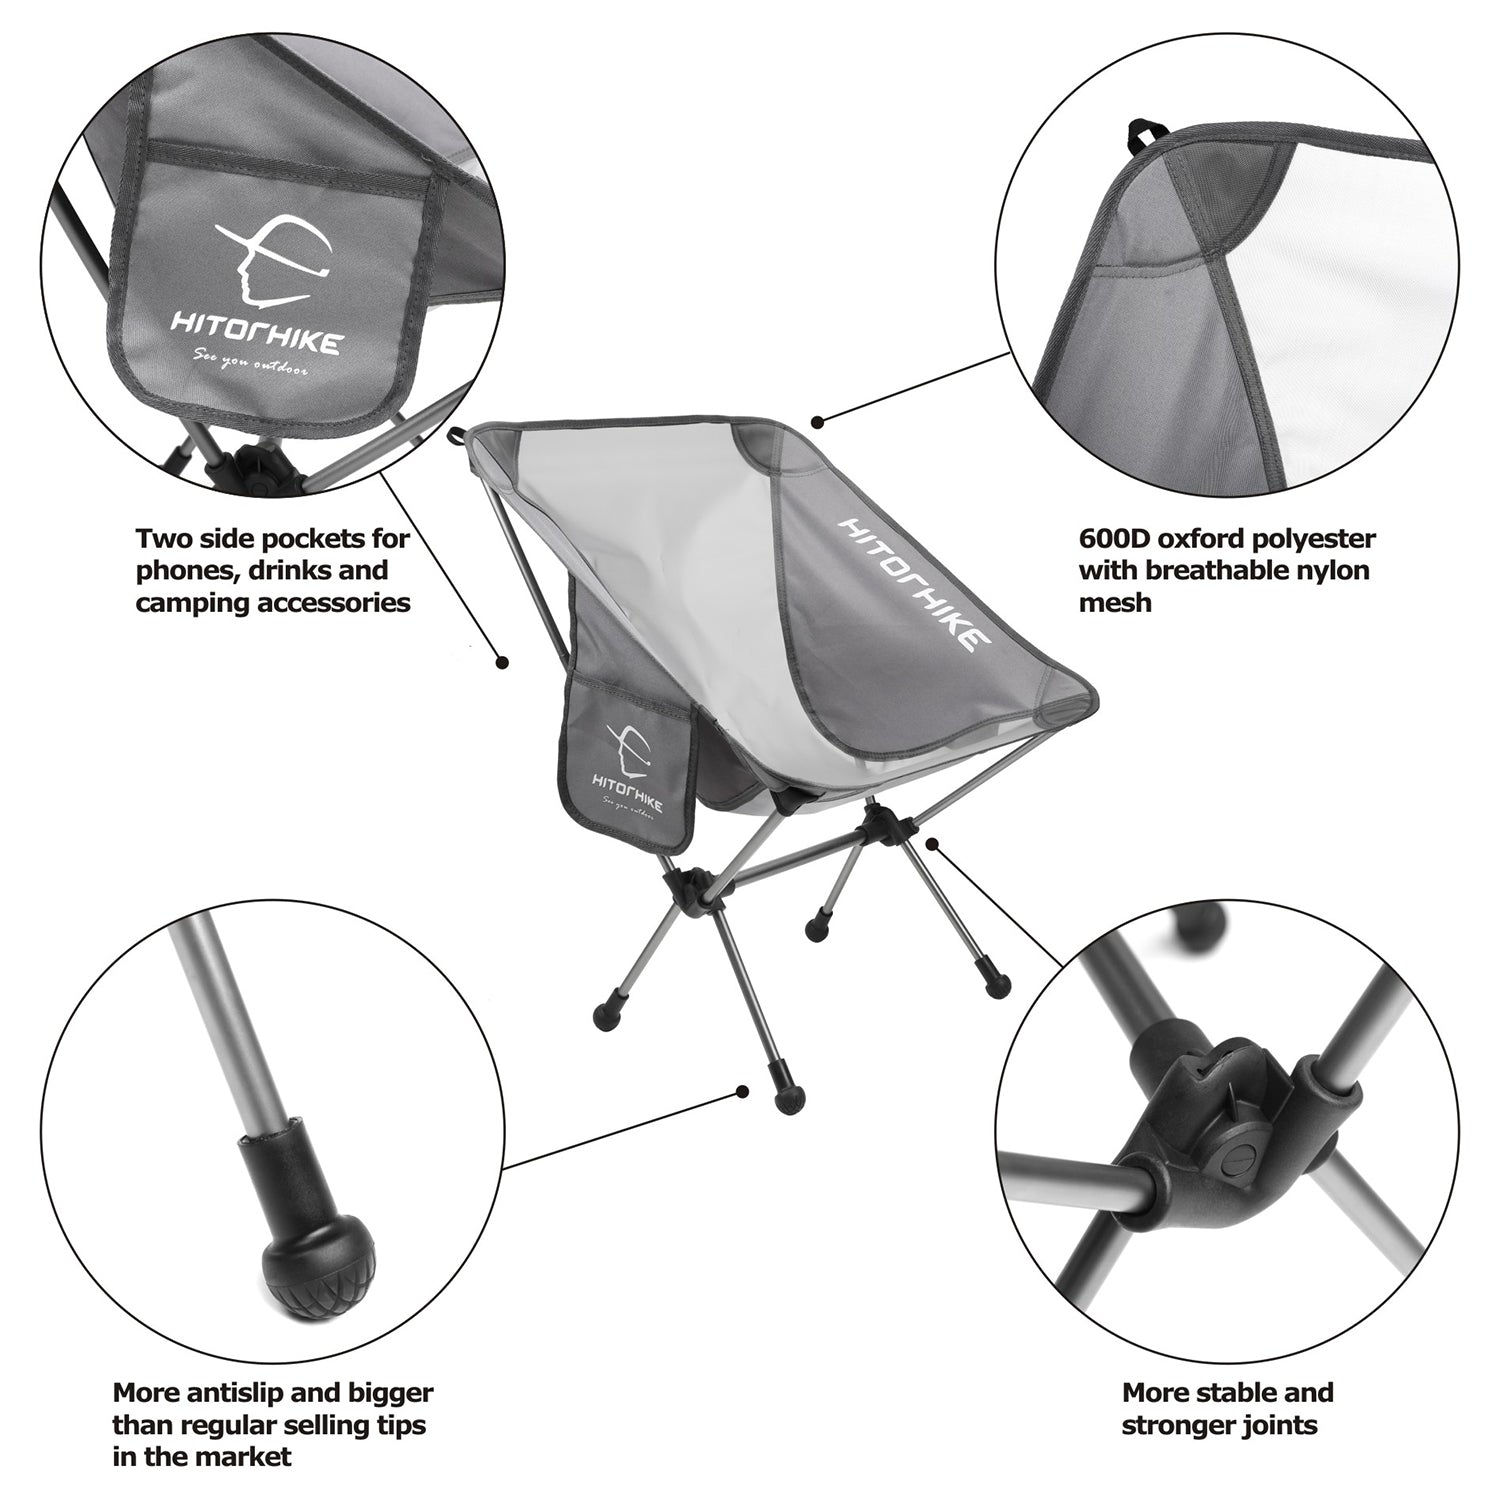 Hitorhike Camping Chair Breathable Mesh Construction 2 Side Pockets Aluminum Frame Camp Chair with Carry Bag 1PCS